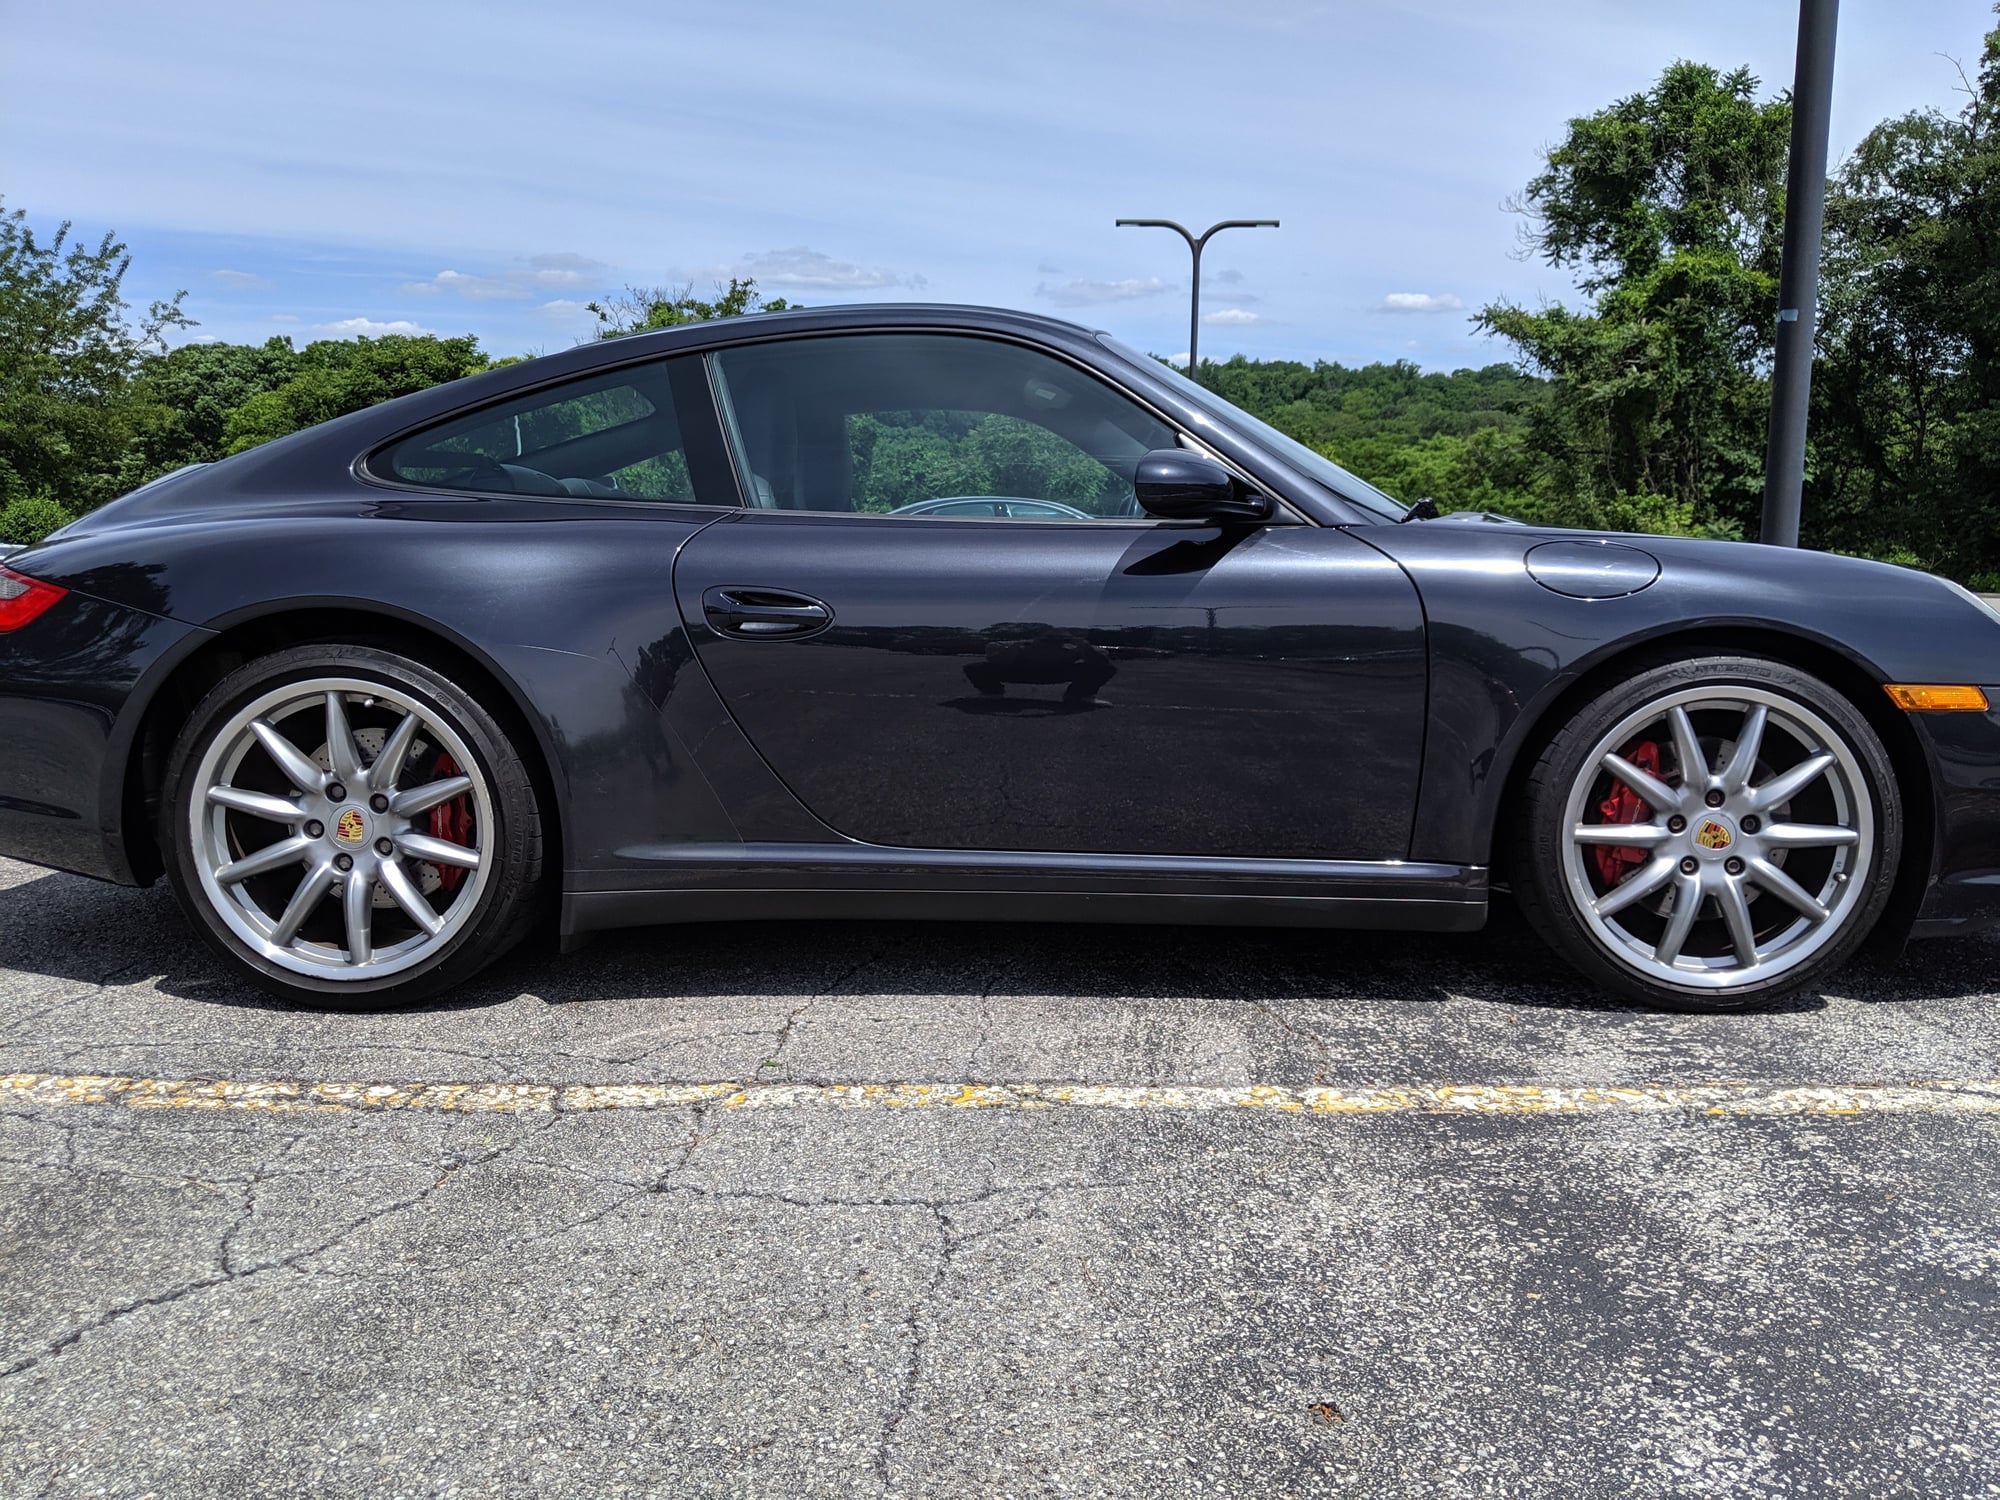 2006 Porsche 911 - 2006 Porsche 911 C4S (997.1) Highly optioned, Atlas Grey. Stock, Excellent condition. - Used - VIN WP0AB29936S743650 - 63,000 Miles - 6 cyl - AWD - Manual - Coupe - Gray - Wilton, CT 06897, United States